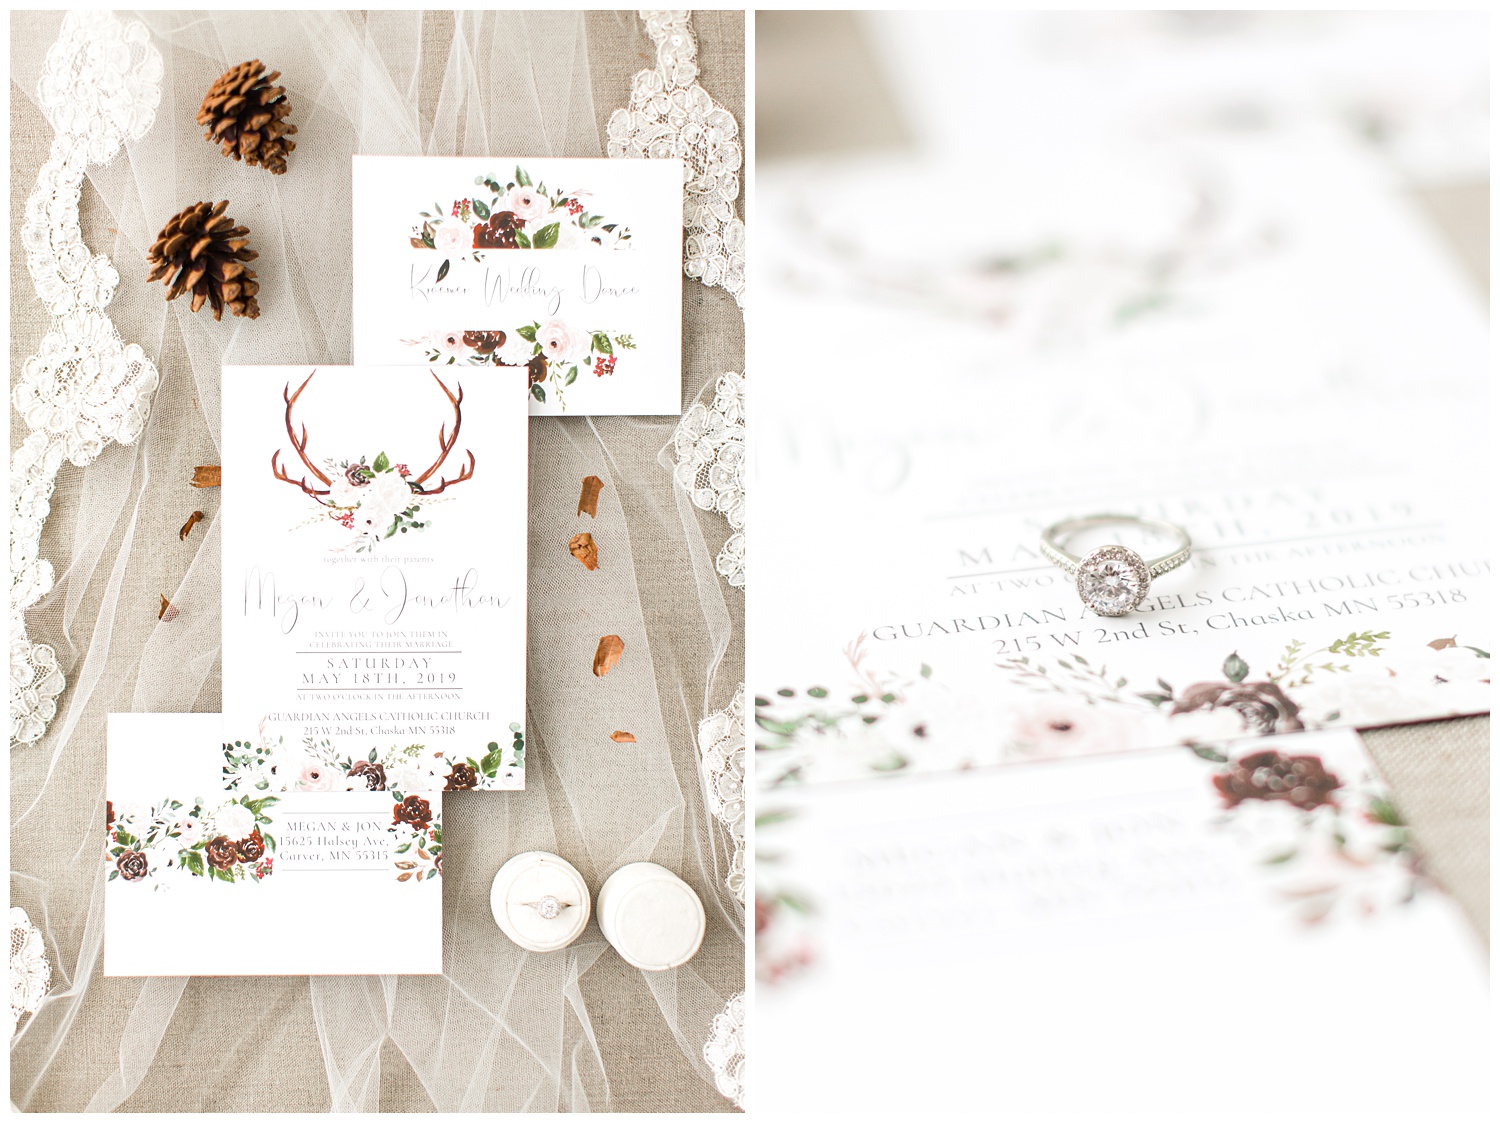 Brown, green and cream watercolor floral/deer antler wedding invitation from Phoenix Home Studio beautifully styled on a wedding veil complete with pine comes and cream ring box.